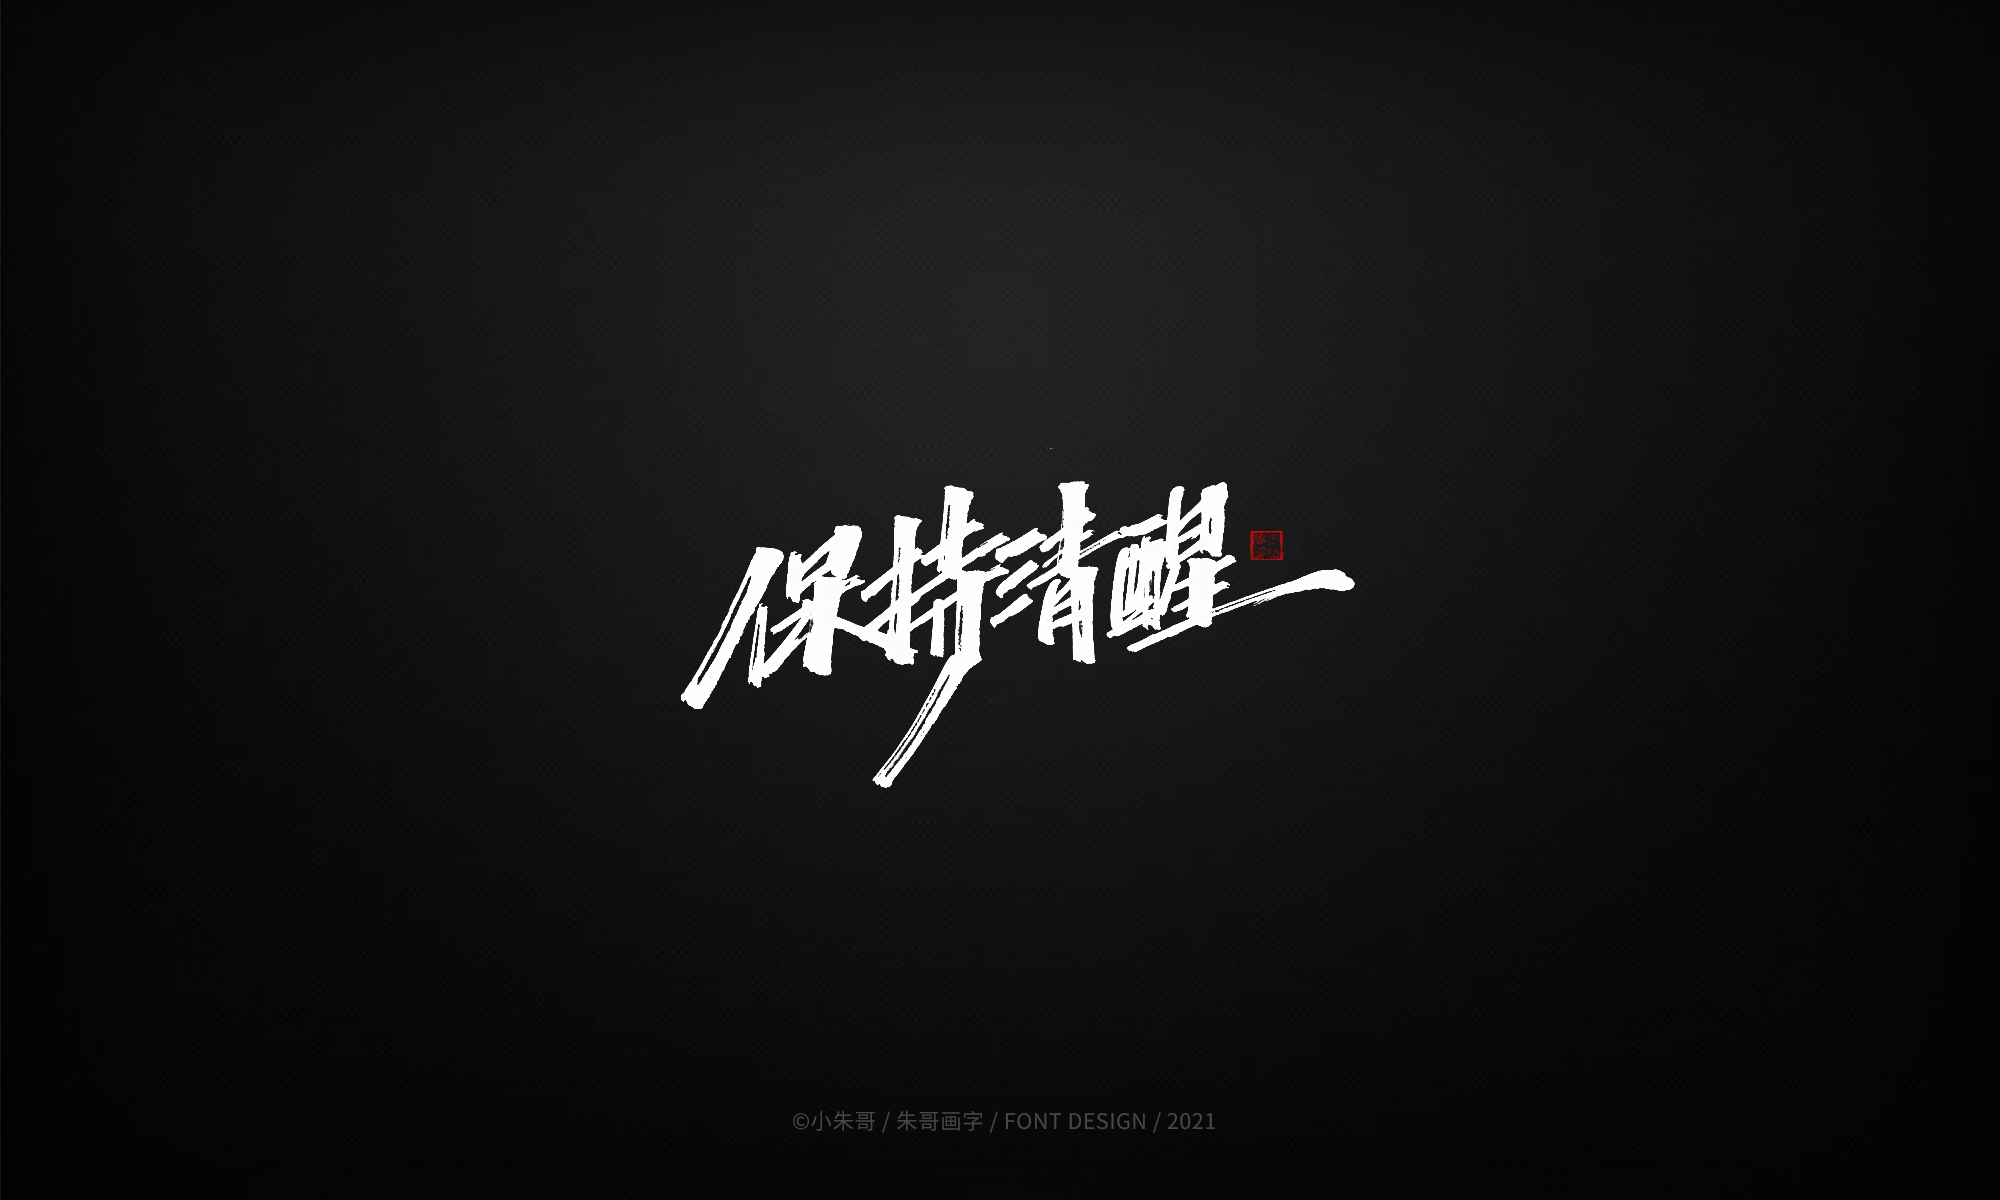 18P Collection of the latest Chinese font design schemes in 2021 #.142